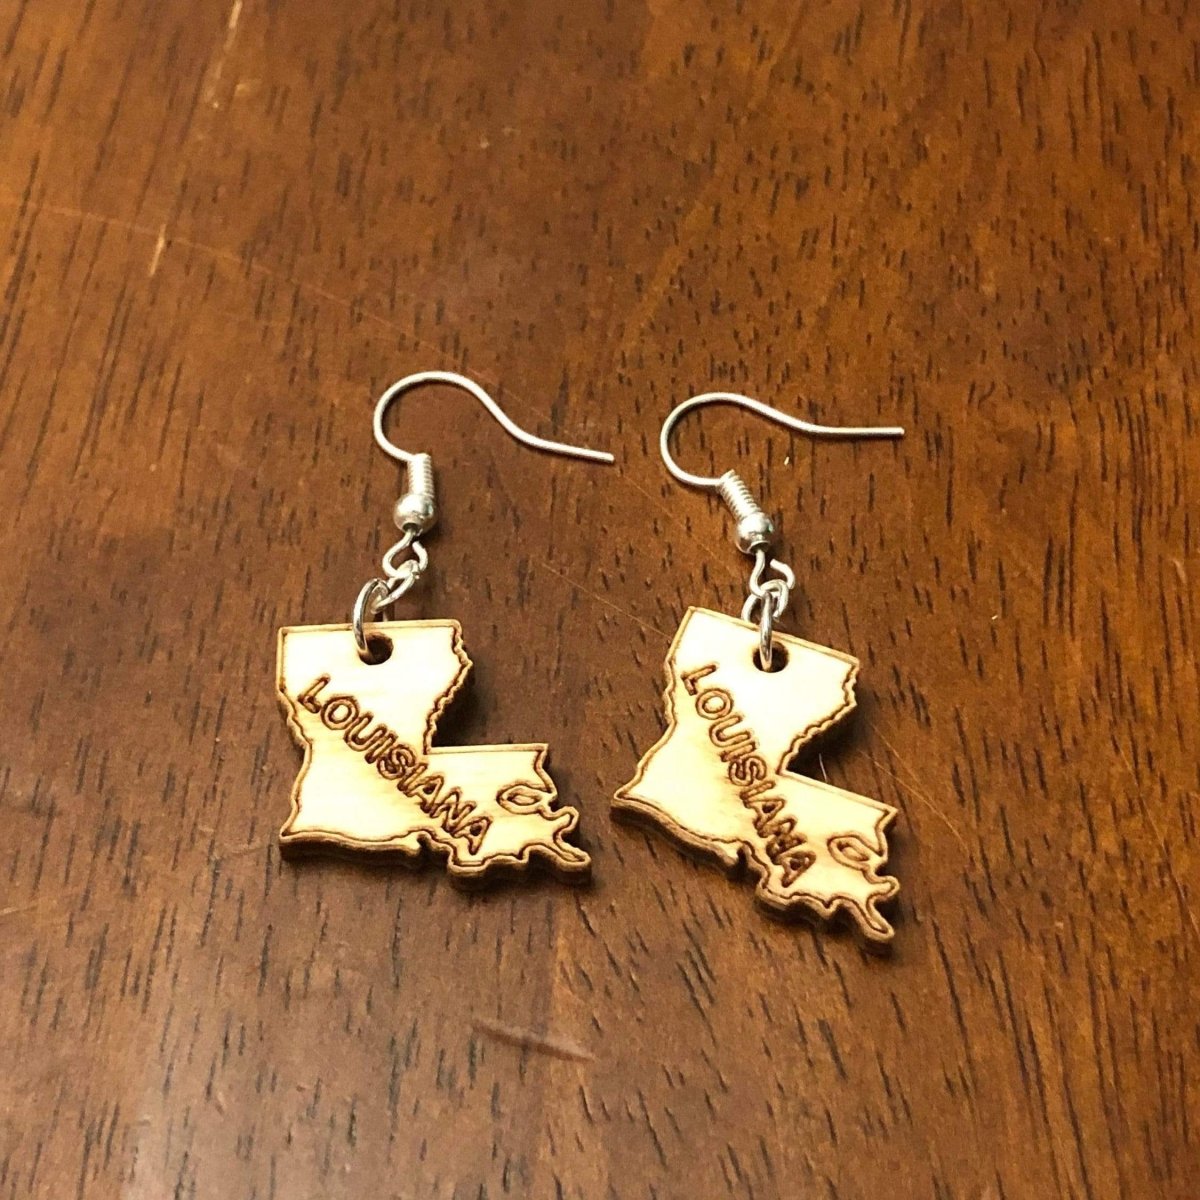 Louisiana State Wooden Dangle Earrings - - Cate's Concepts, LLC